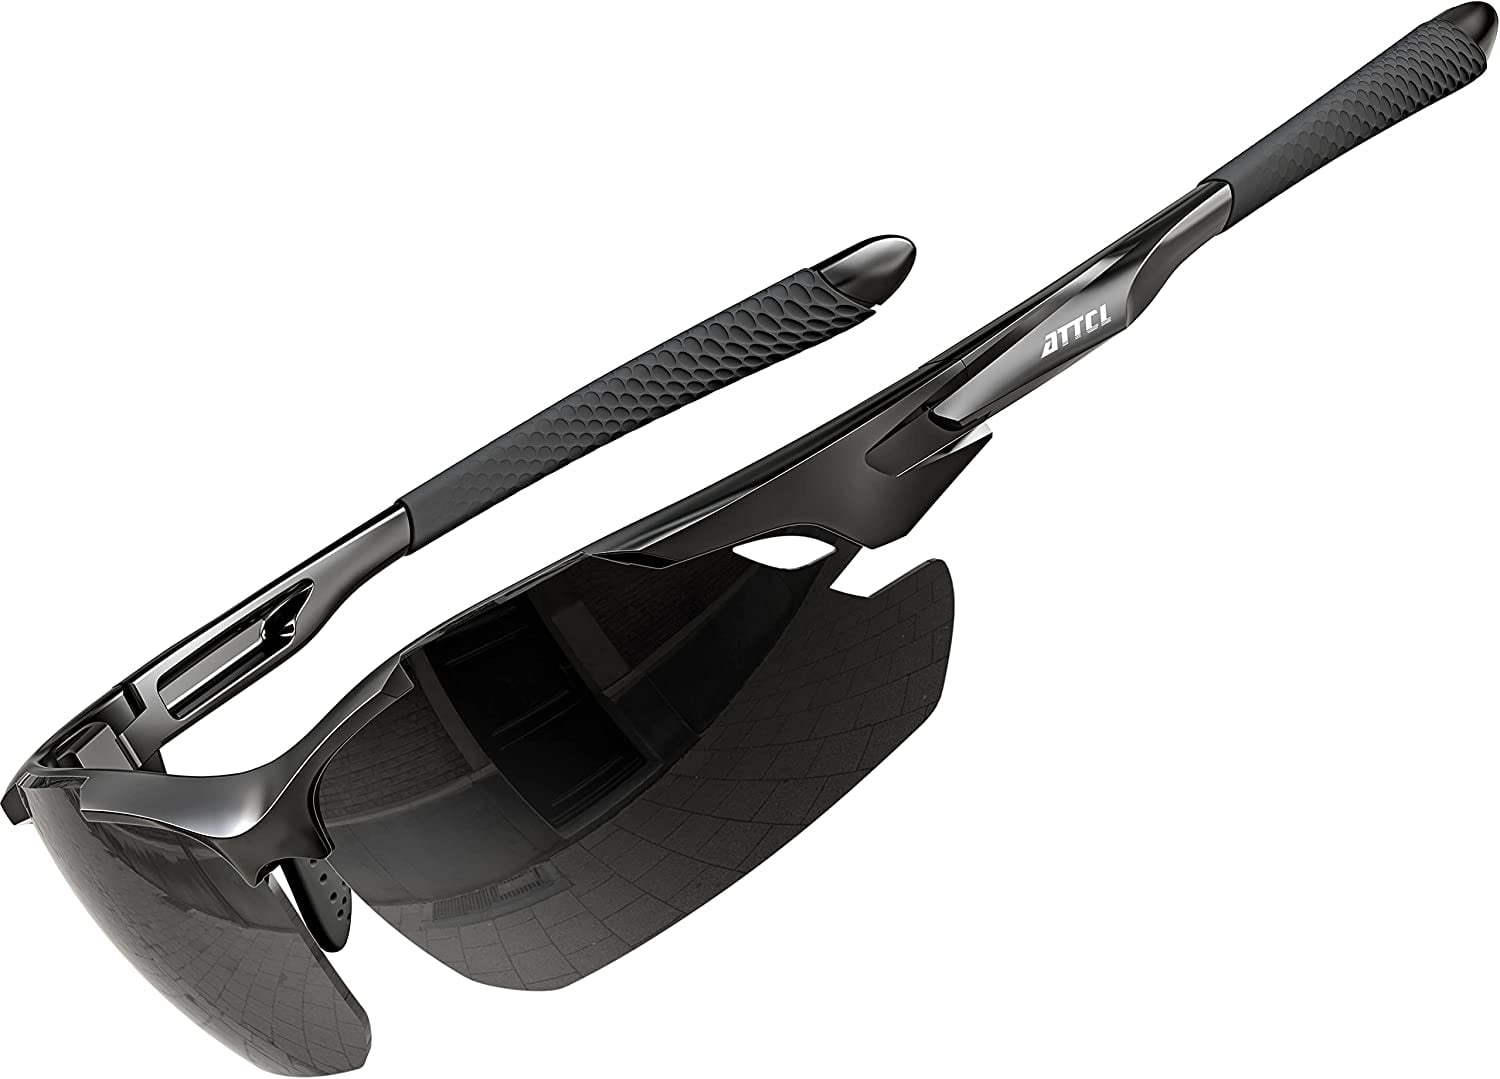 ATTCL Sunglasses for Men Sports Polarized Sunglasses for Cycling